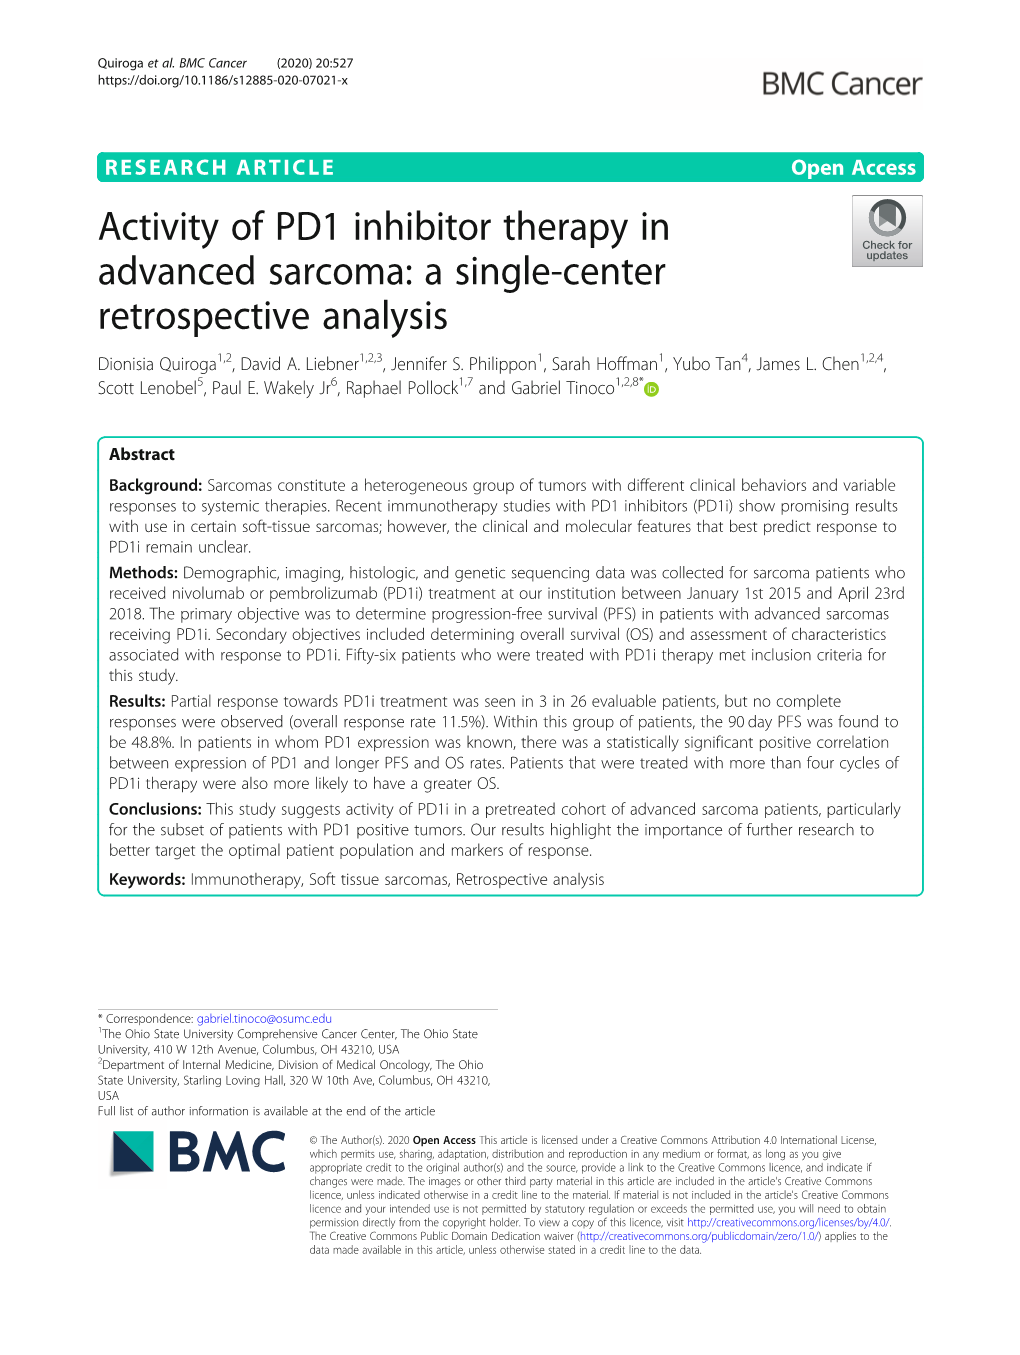 Activity of PD1 Inhibitor Therapy in Advanced Sarcoma: a Single-Center Retrospective Analysis Dionisia Quiroga1,2, David A